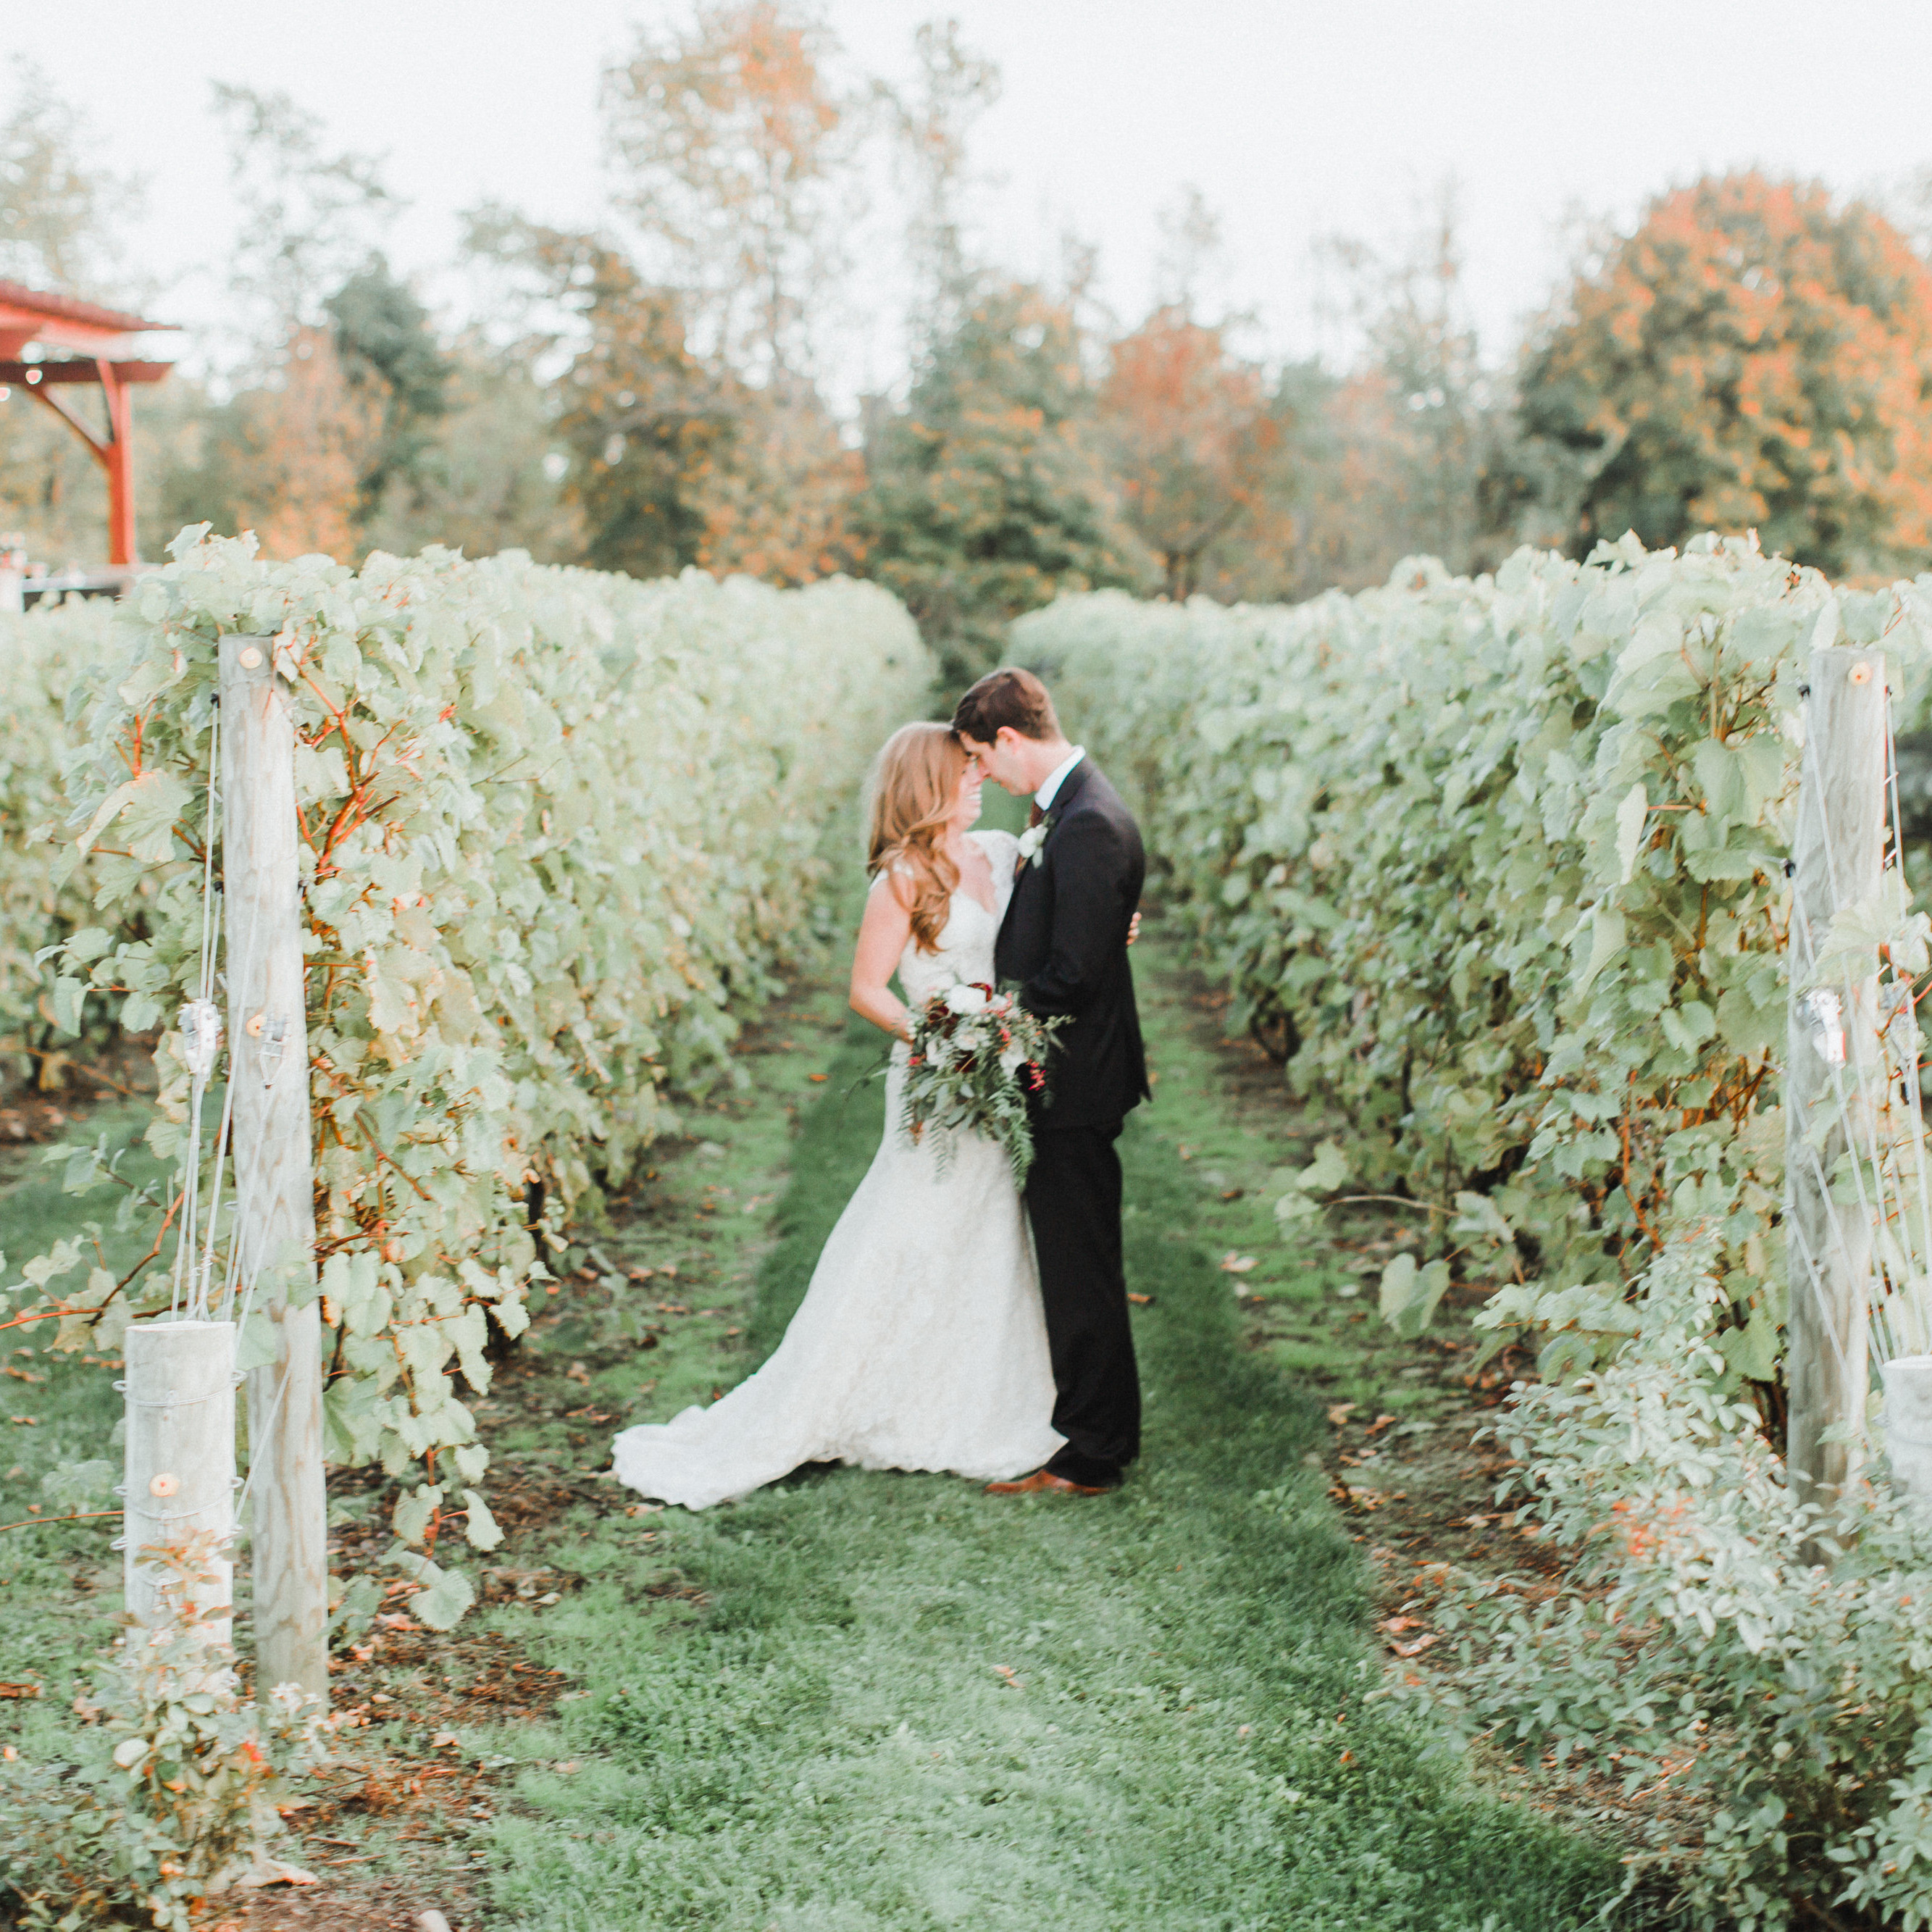 View More: http://annamarieakins.pass.us/billy-and-katie